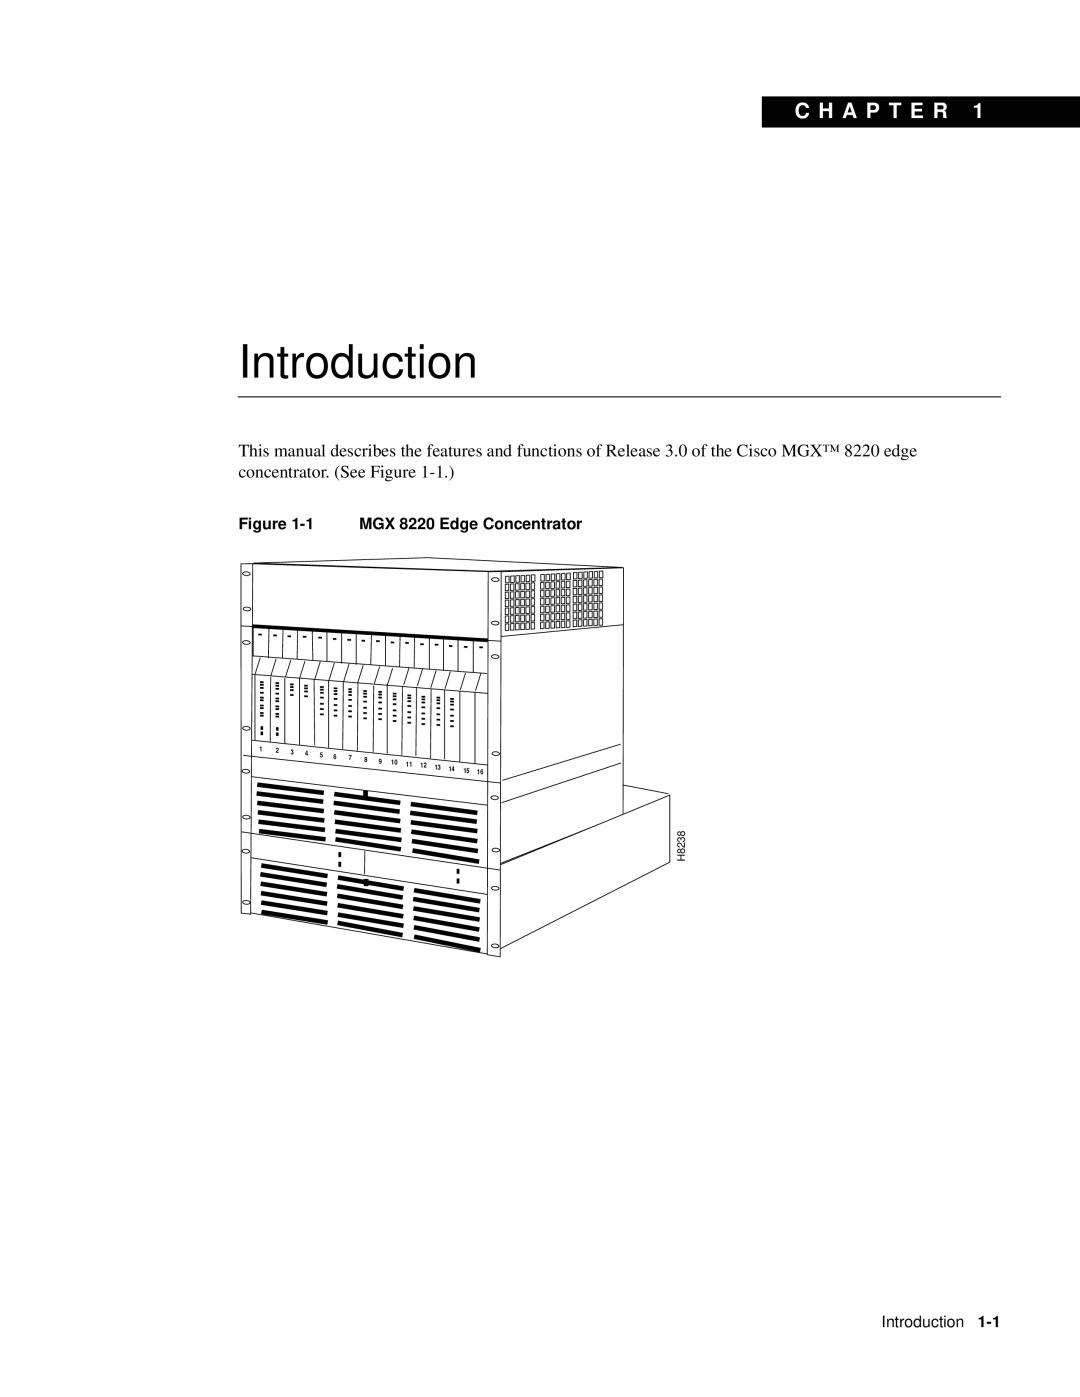 Cisco Systems manual Introduction, C H A P T E R, 1 MGX 8220 Edge Concentrator, H8238 